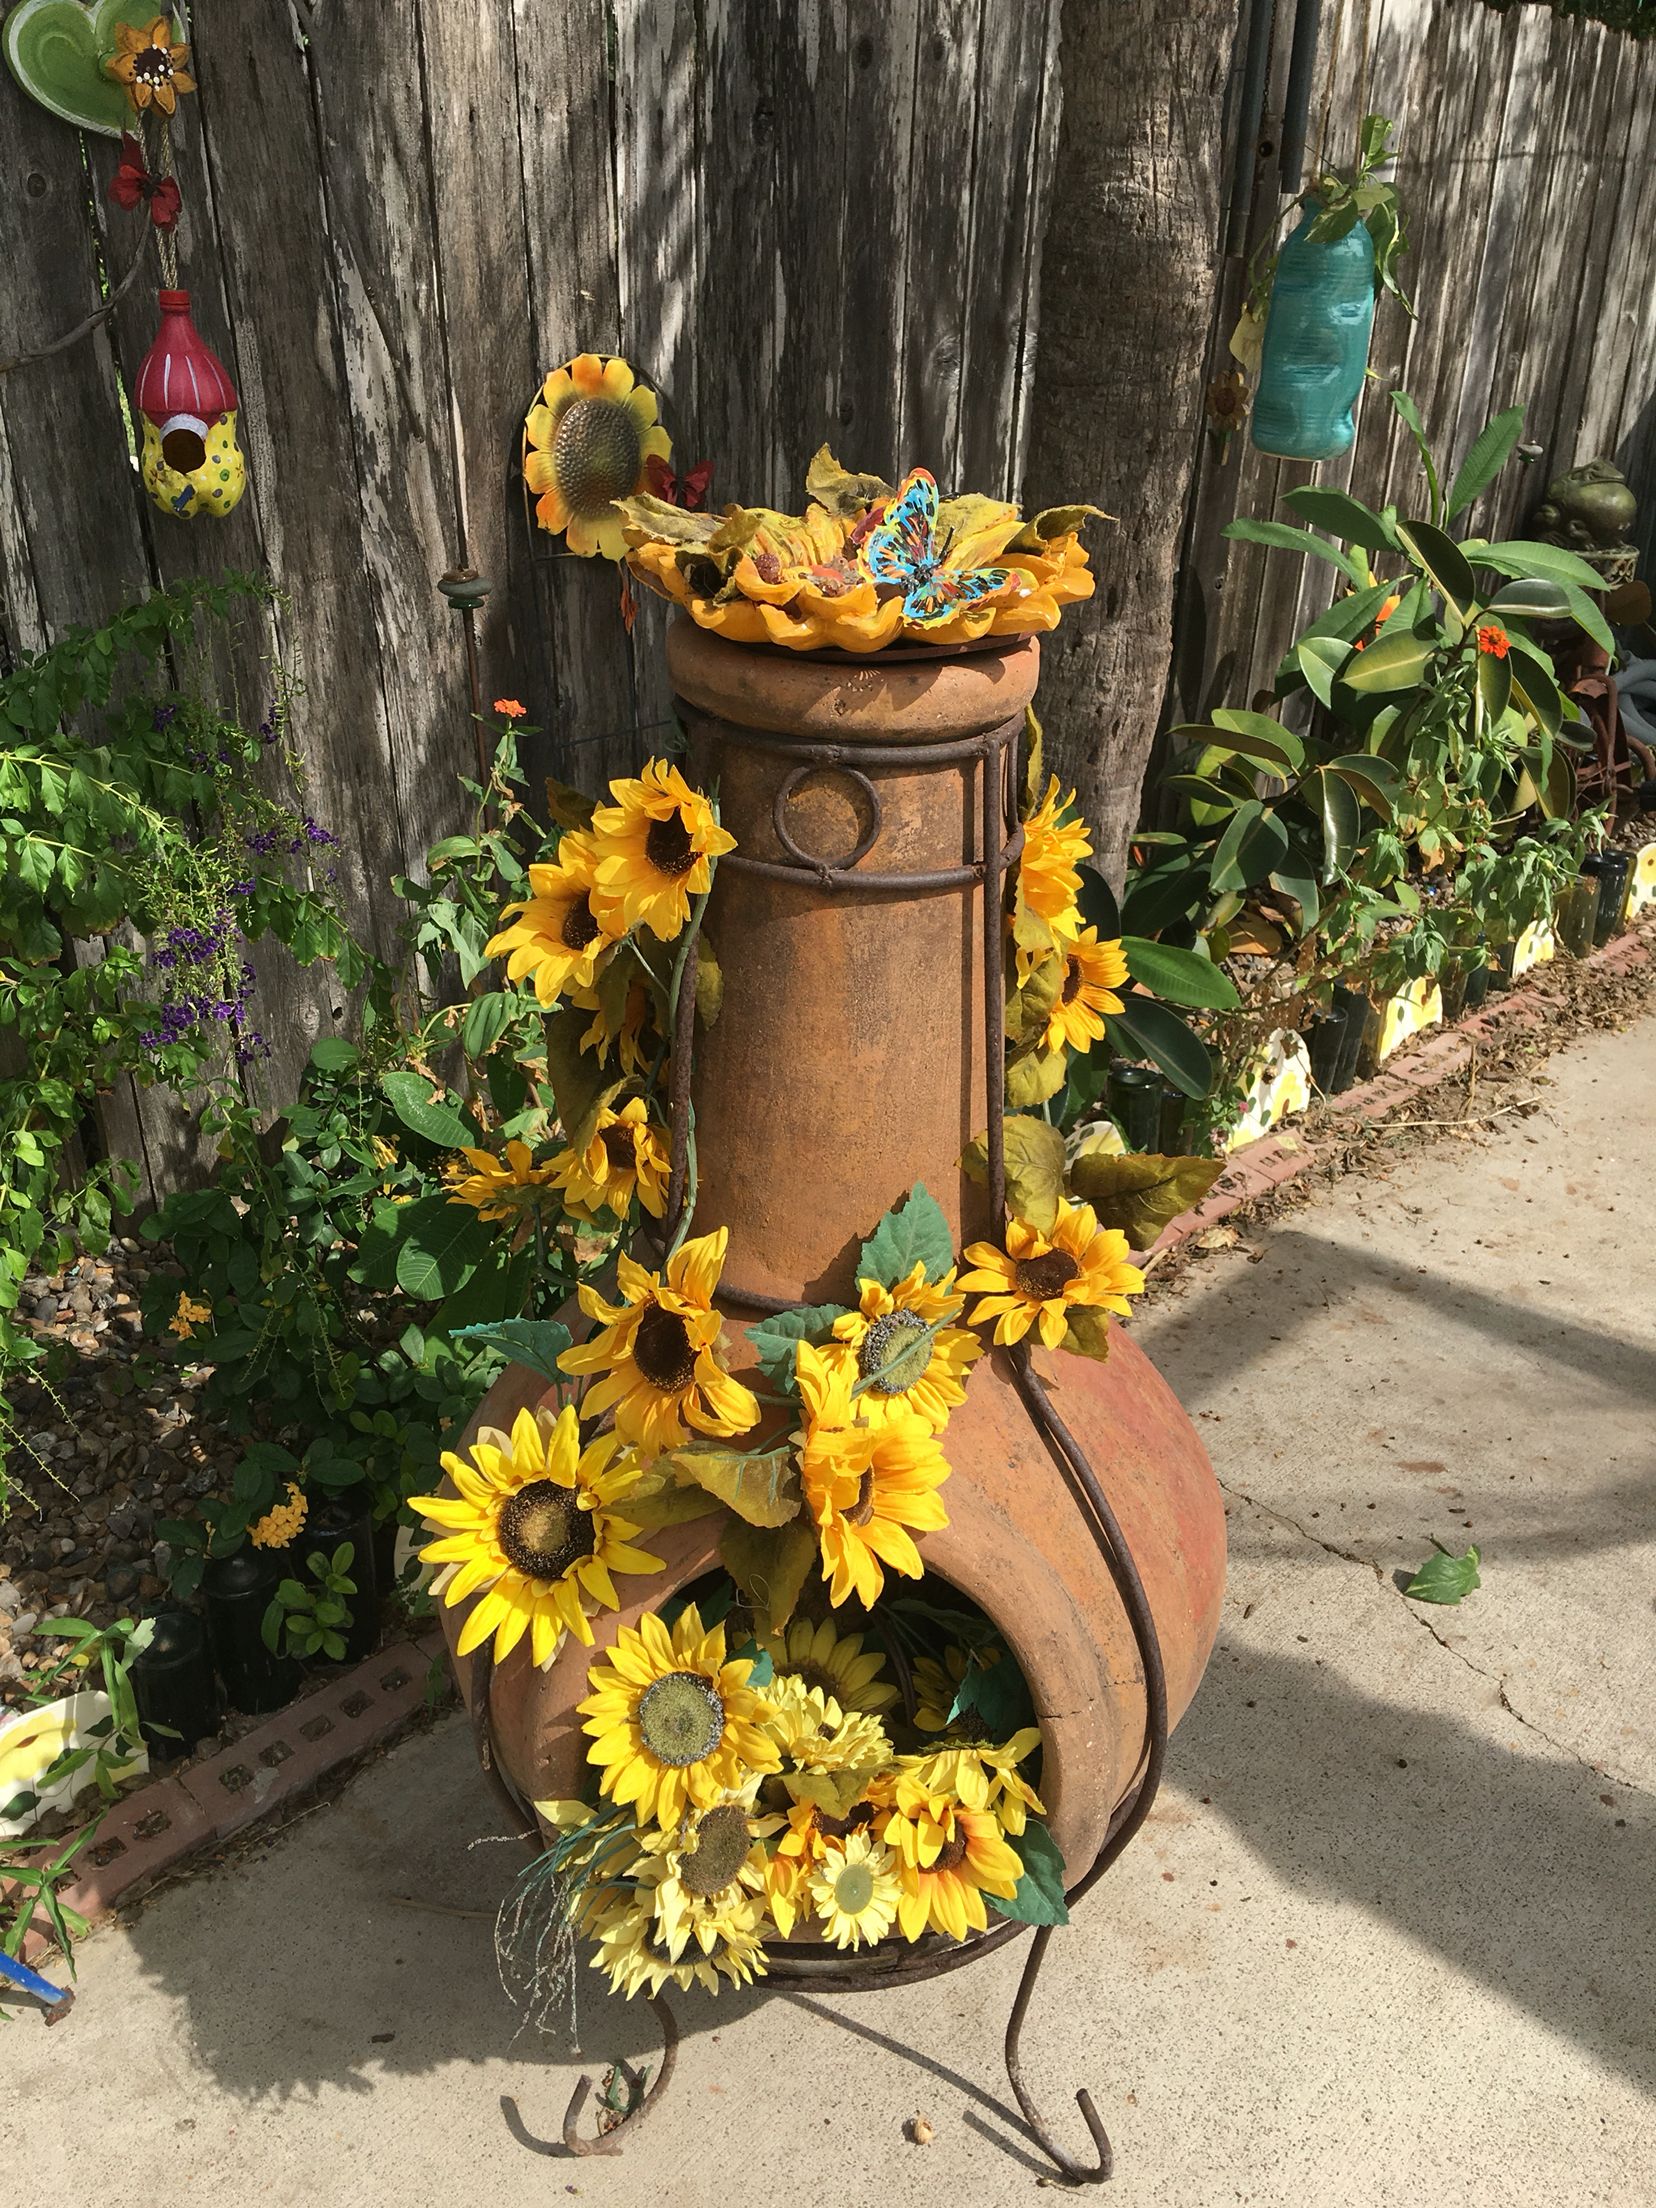 Sunflowers on outdoor Mexican burning log holder | OUTDOOR SWINGS ...